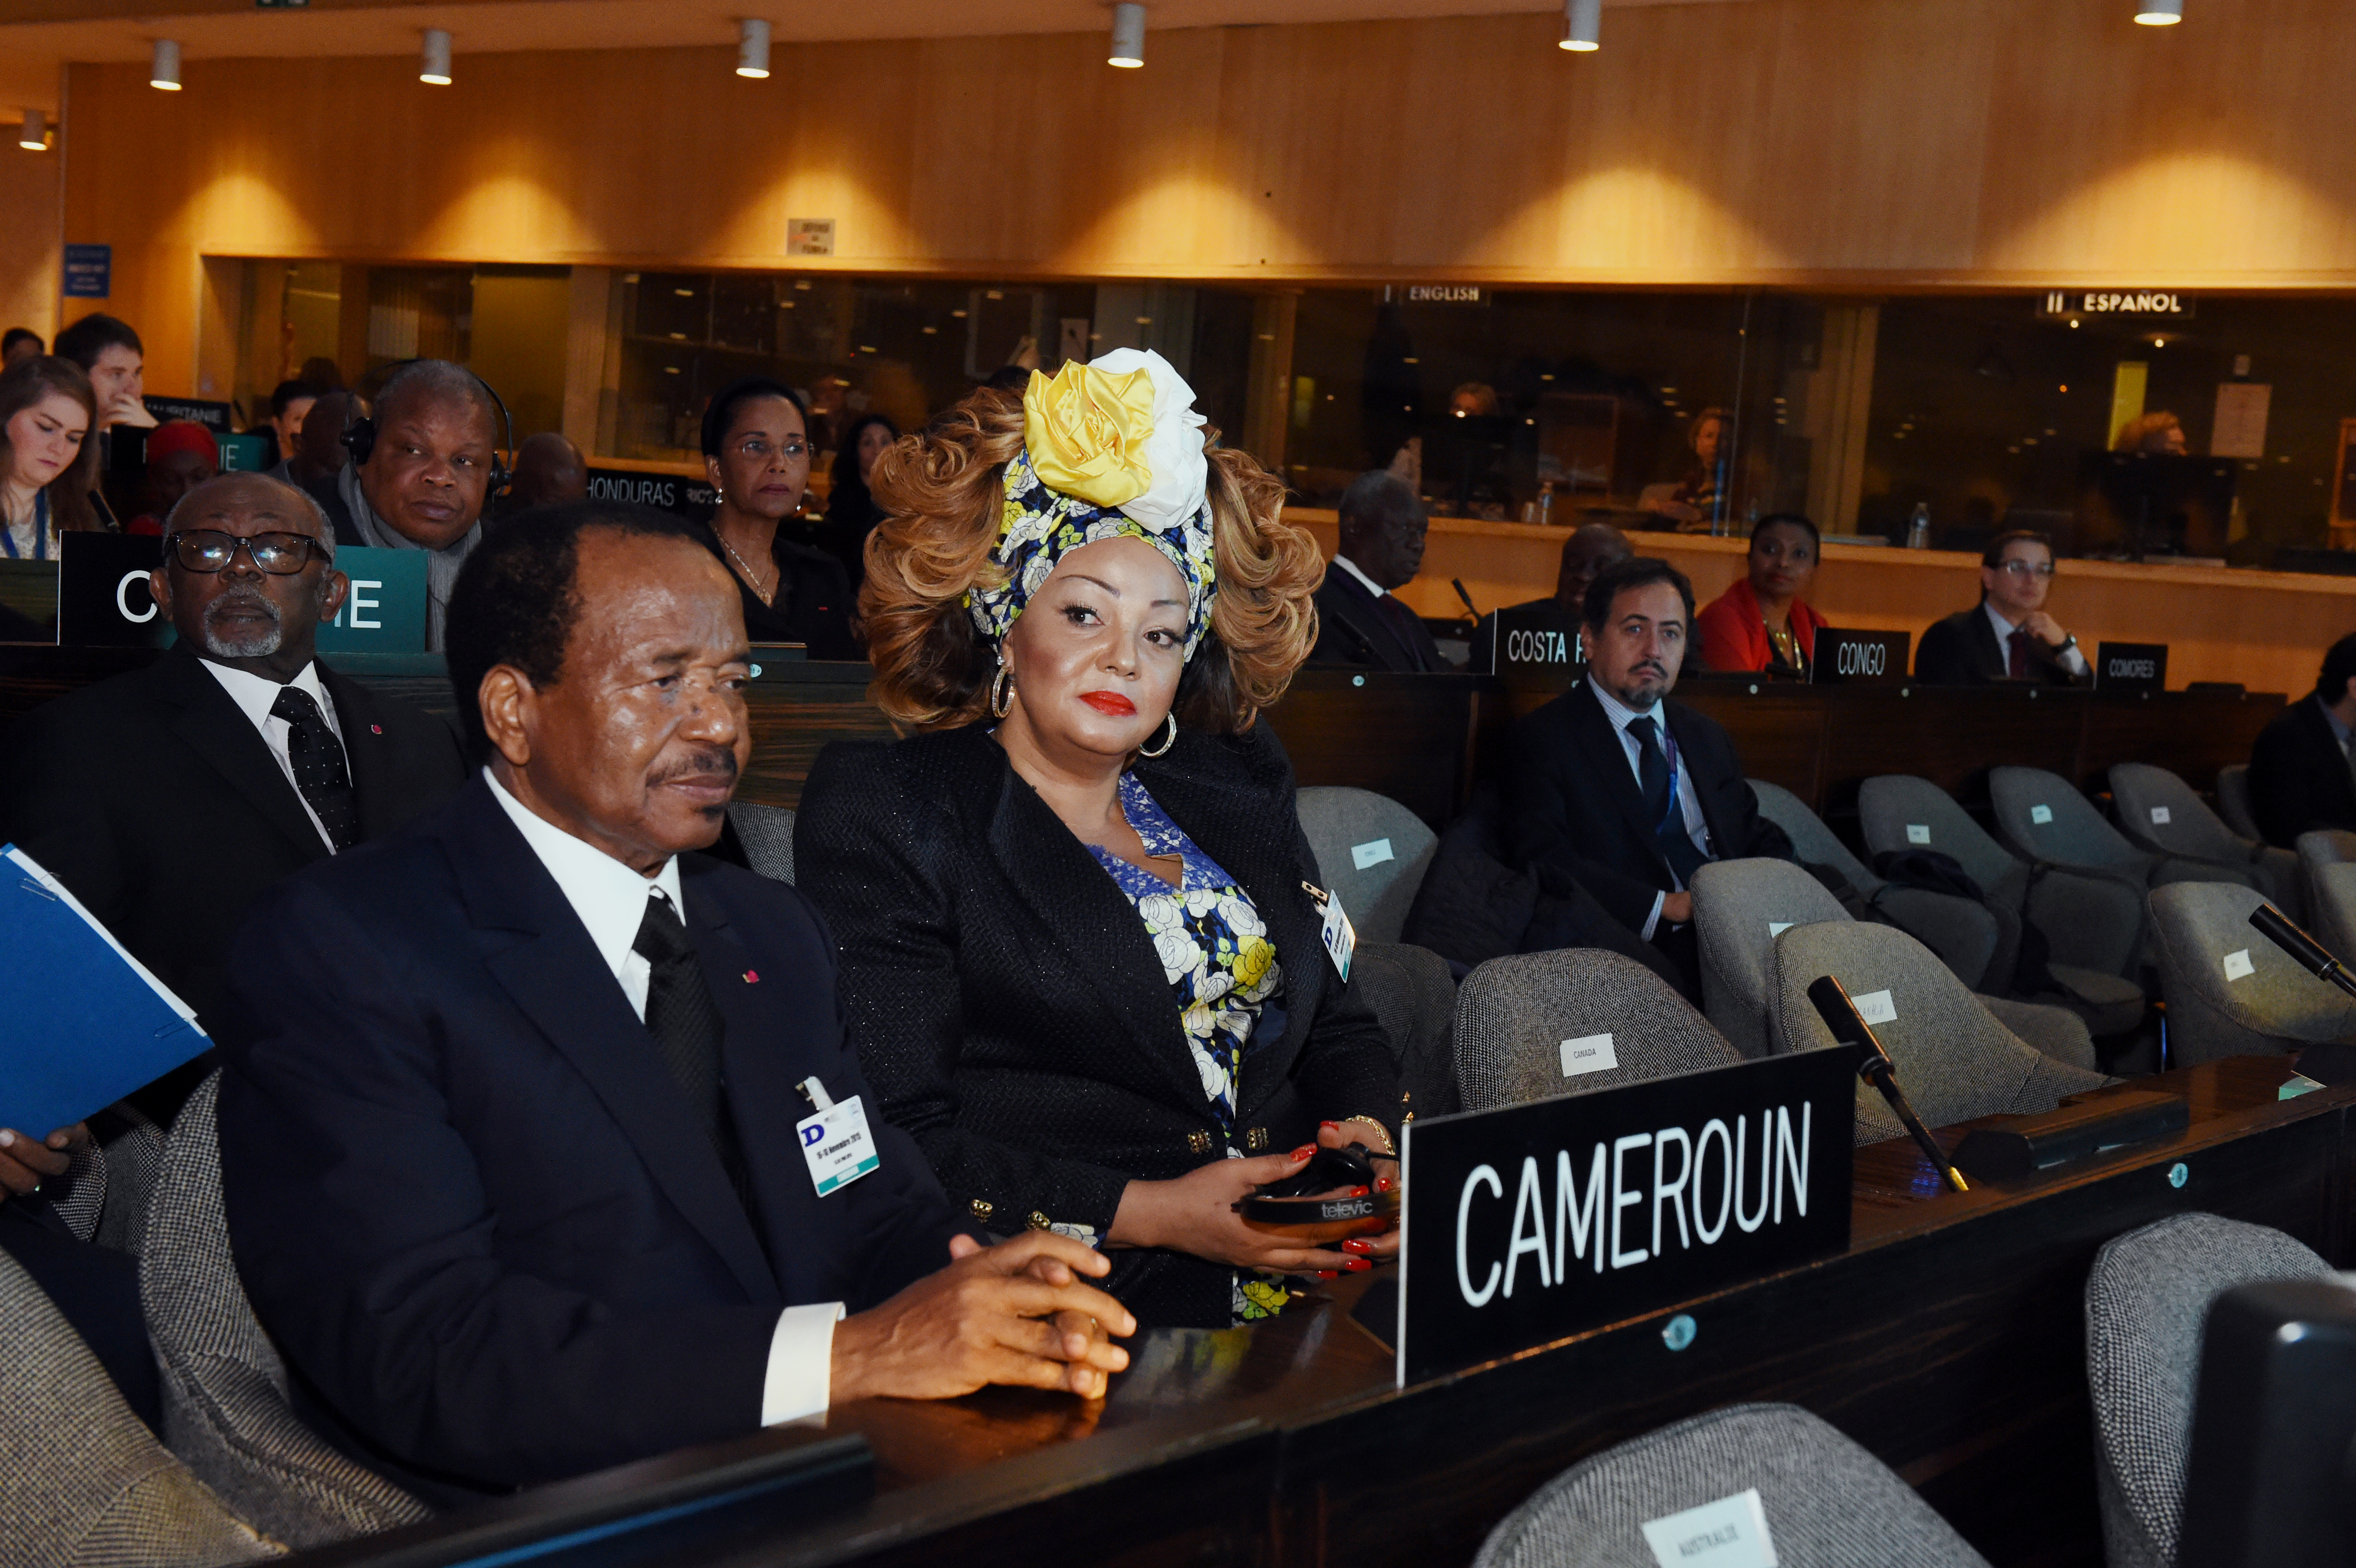 The Presidential Couple at the UNESCO Conference